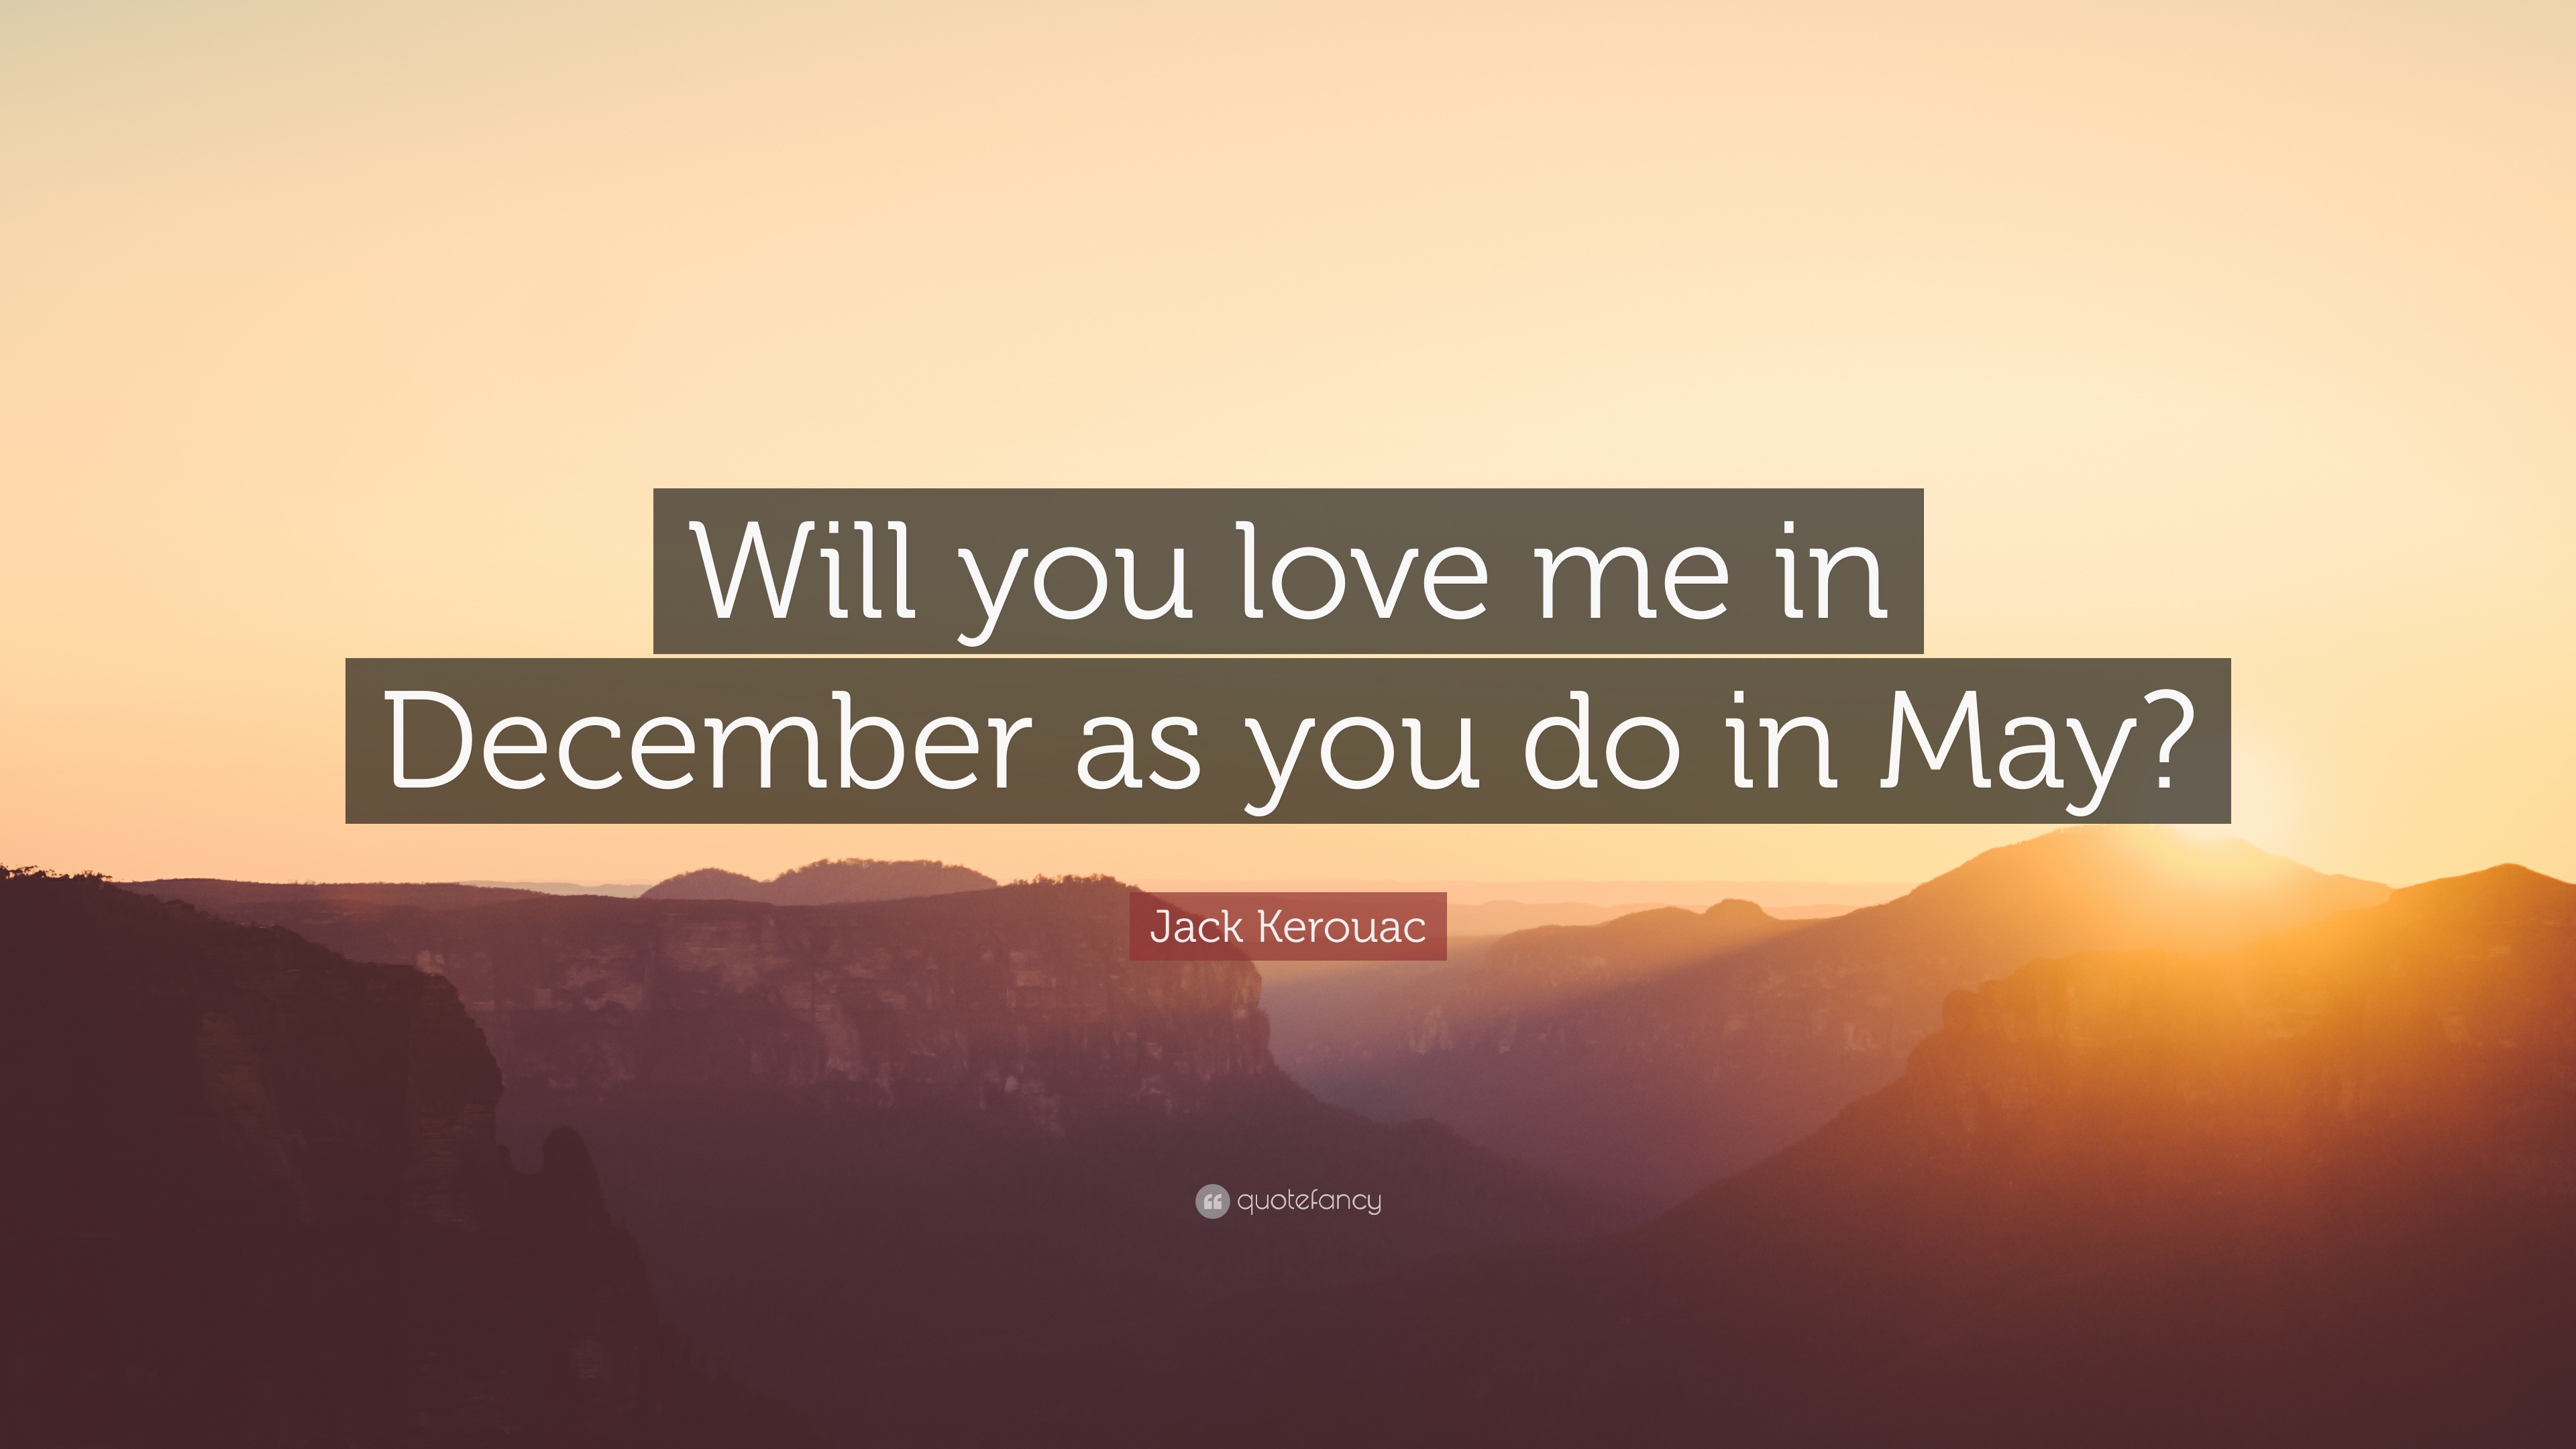 Jack Kerouac Quote “Will you love me in December as you do in May